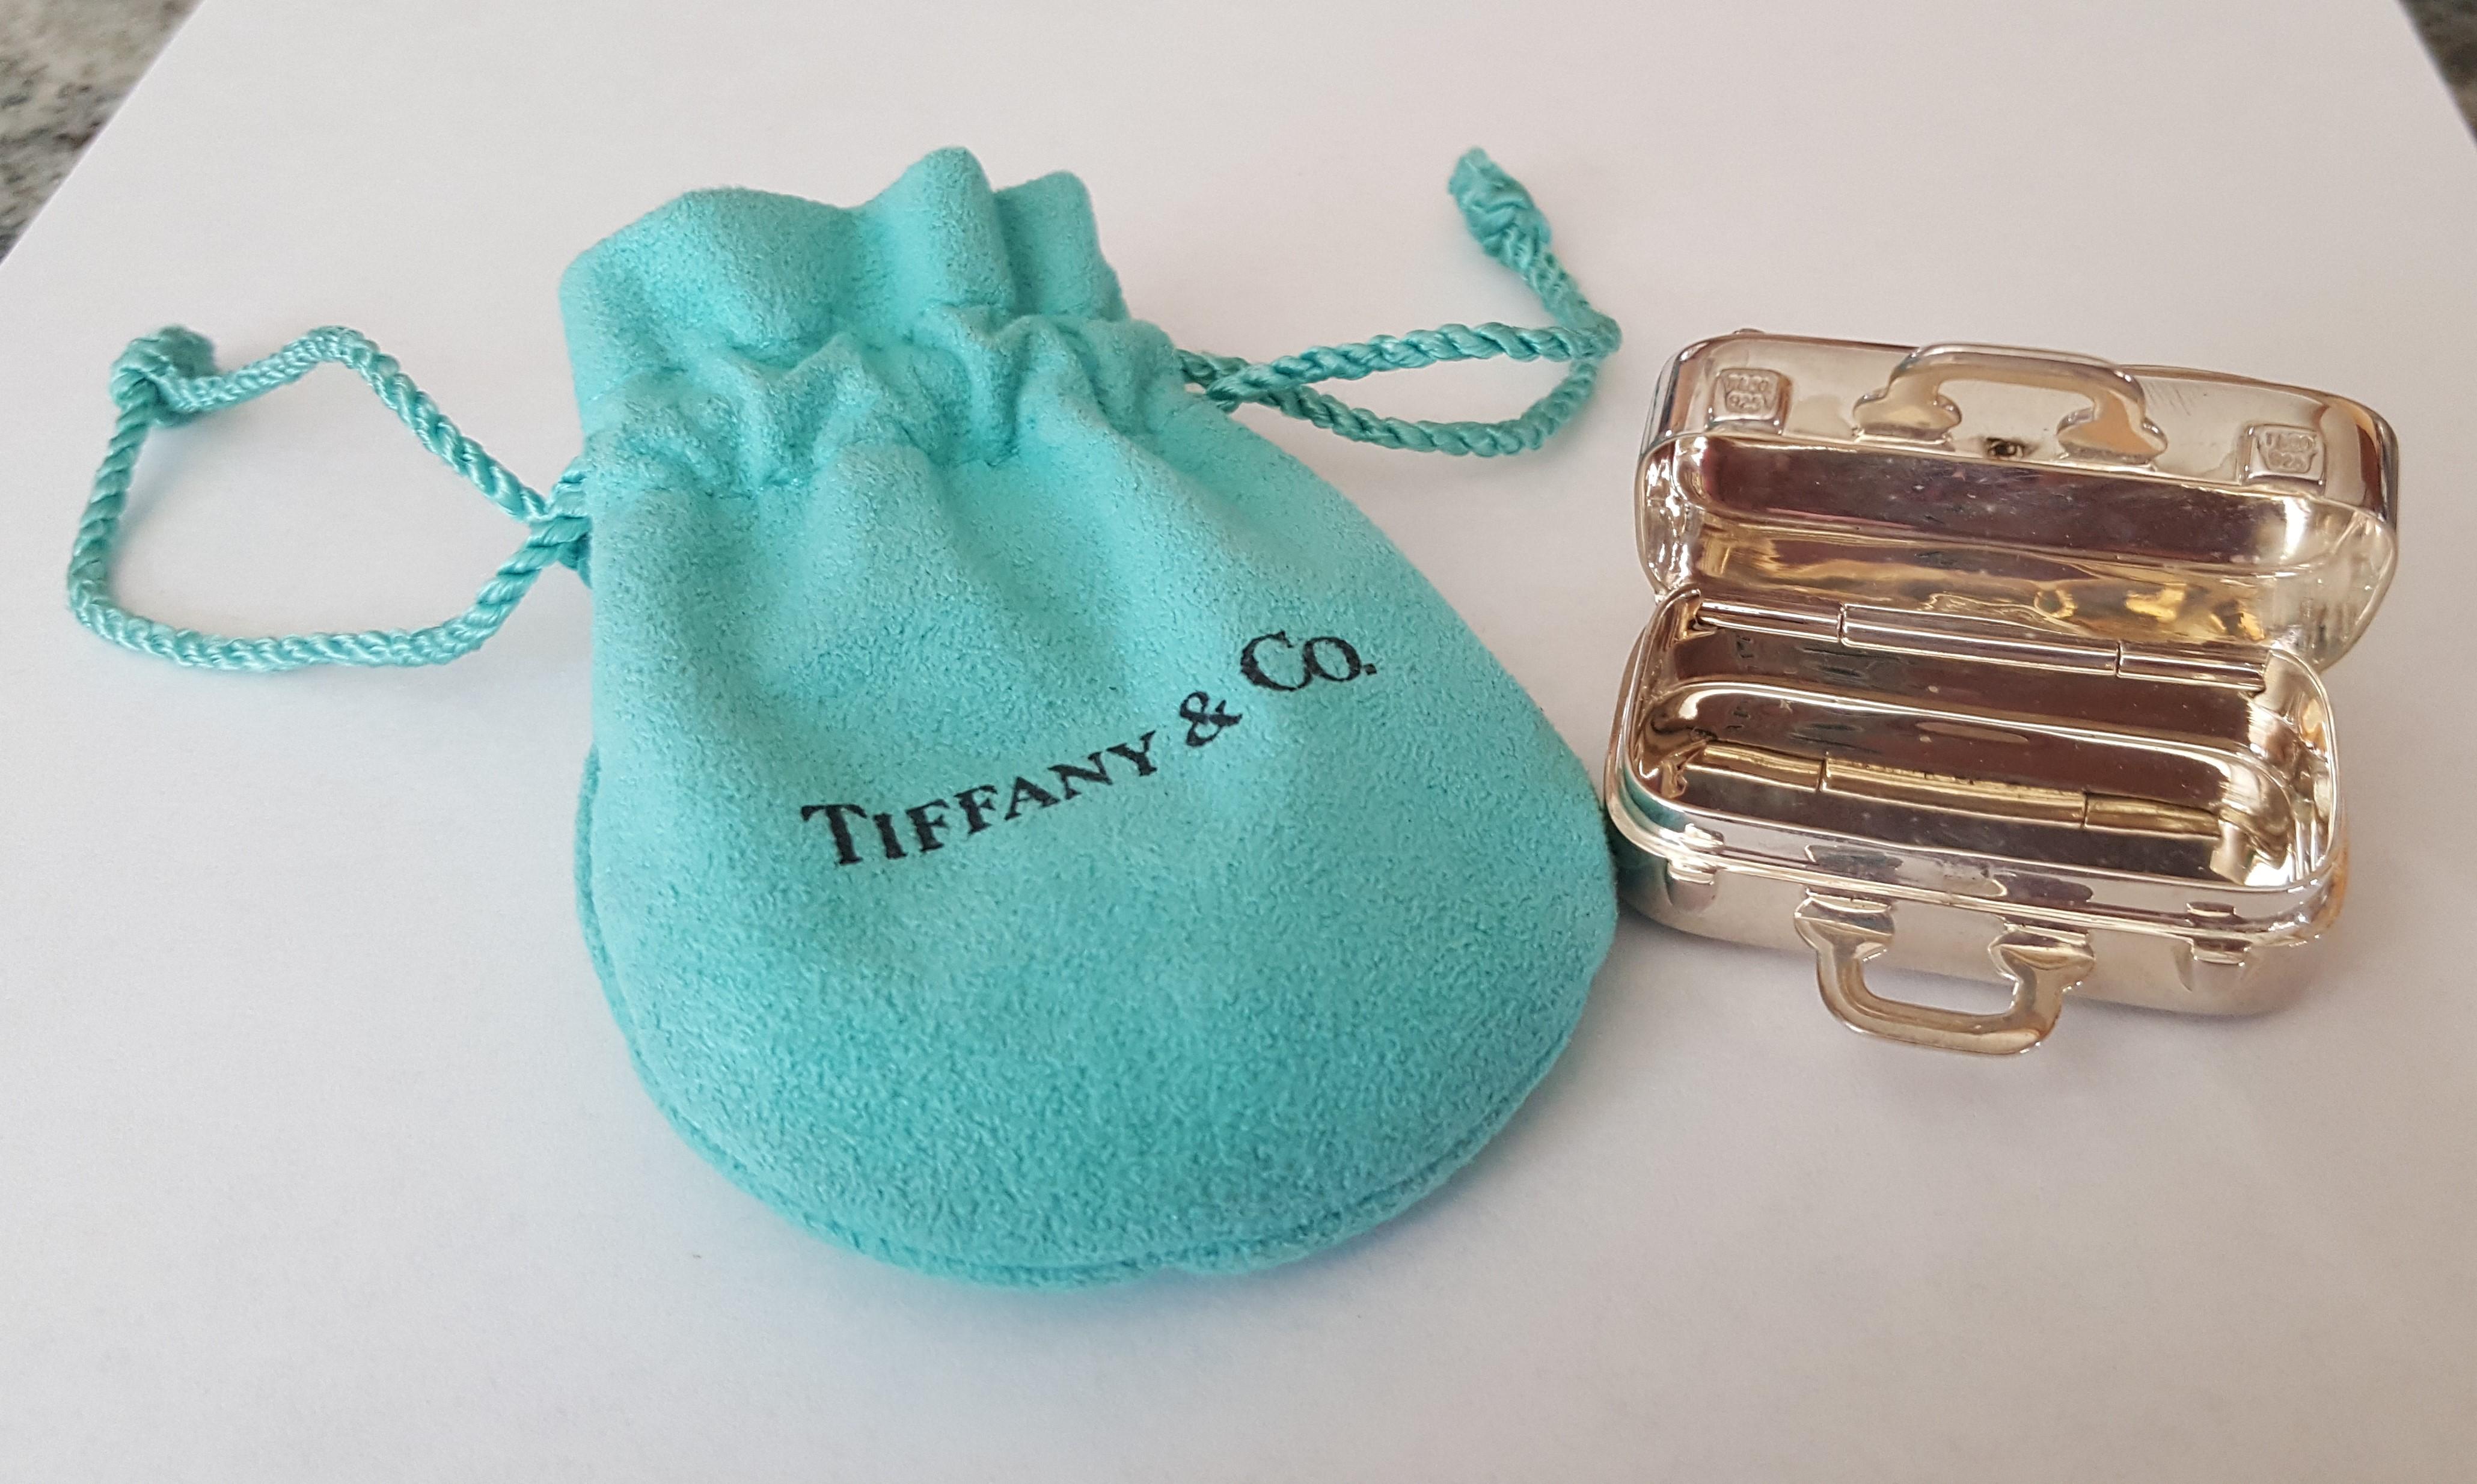 Tiffany Co 925 Silver Pillbox, suitcase luggage that says London, New York, Beverly Hills on one side and Tokyo, Munich, and Honolulu on the other. Not in production anymore, great for a collector.  Gram weight 37.8, dimensions 24mm x 16mm x 44mm.